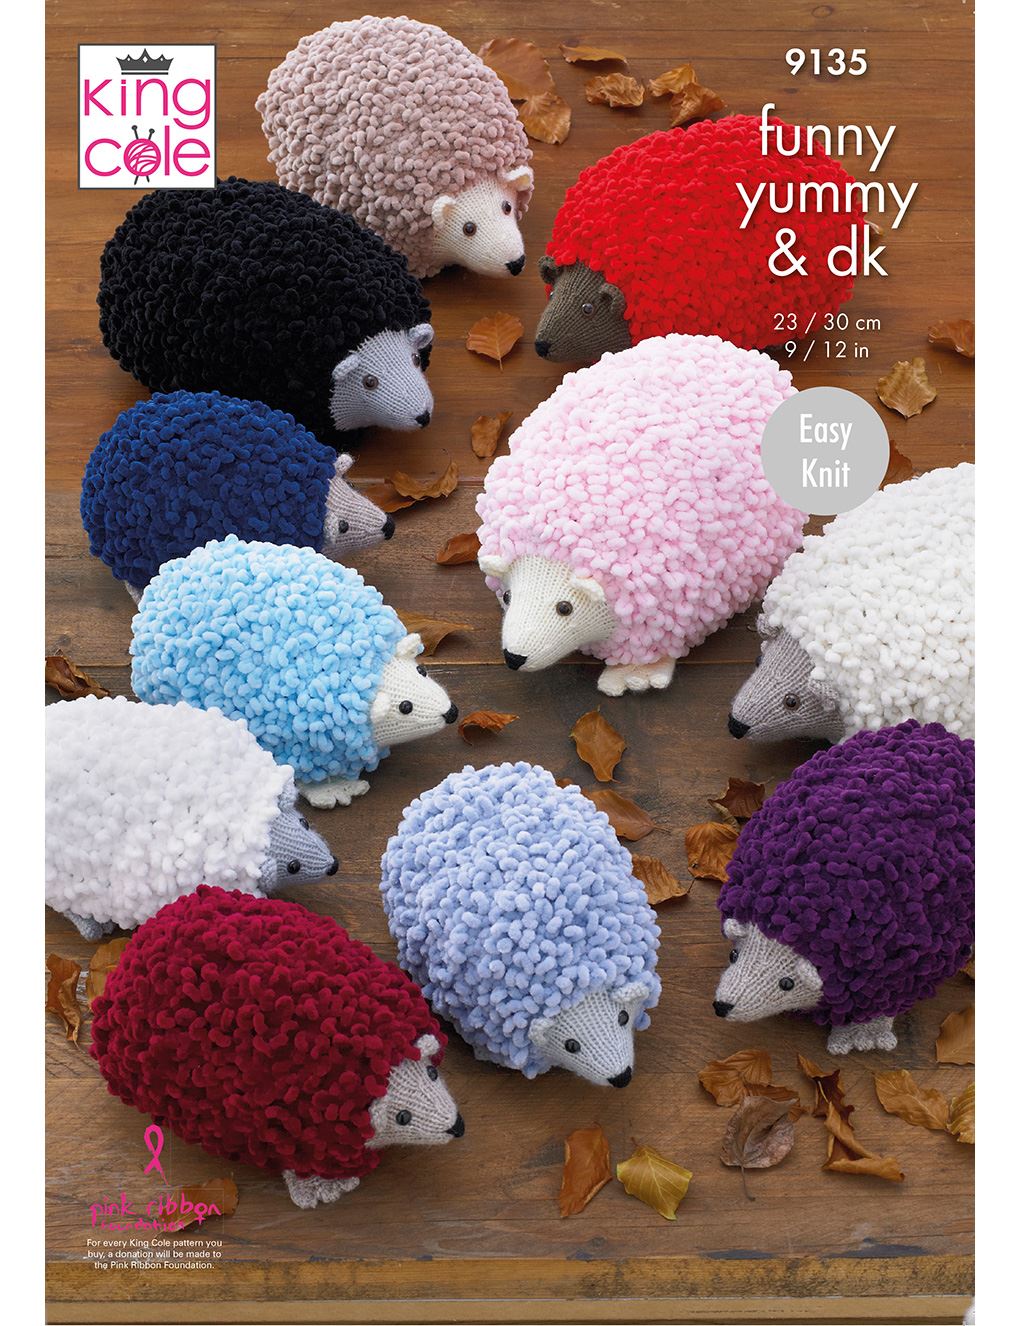 King Cole Funny Yummy knitting pattern (9135) hedgehogs